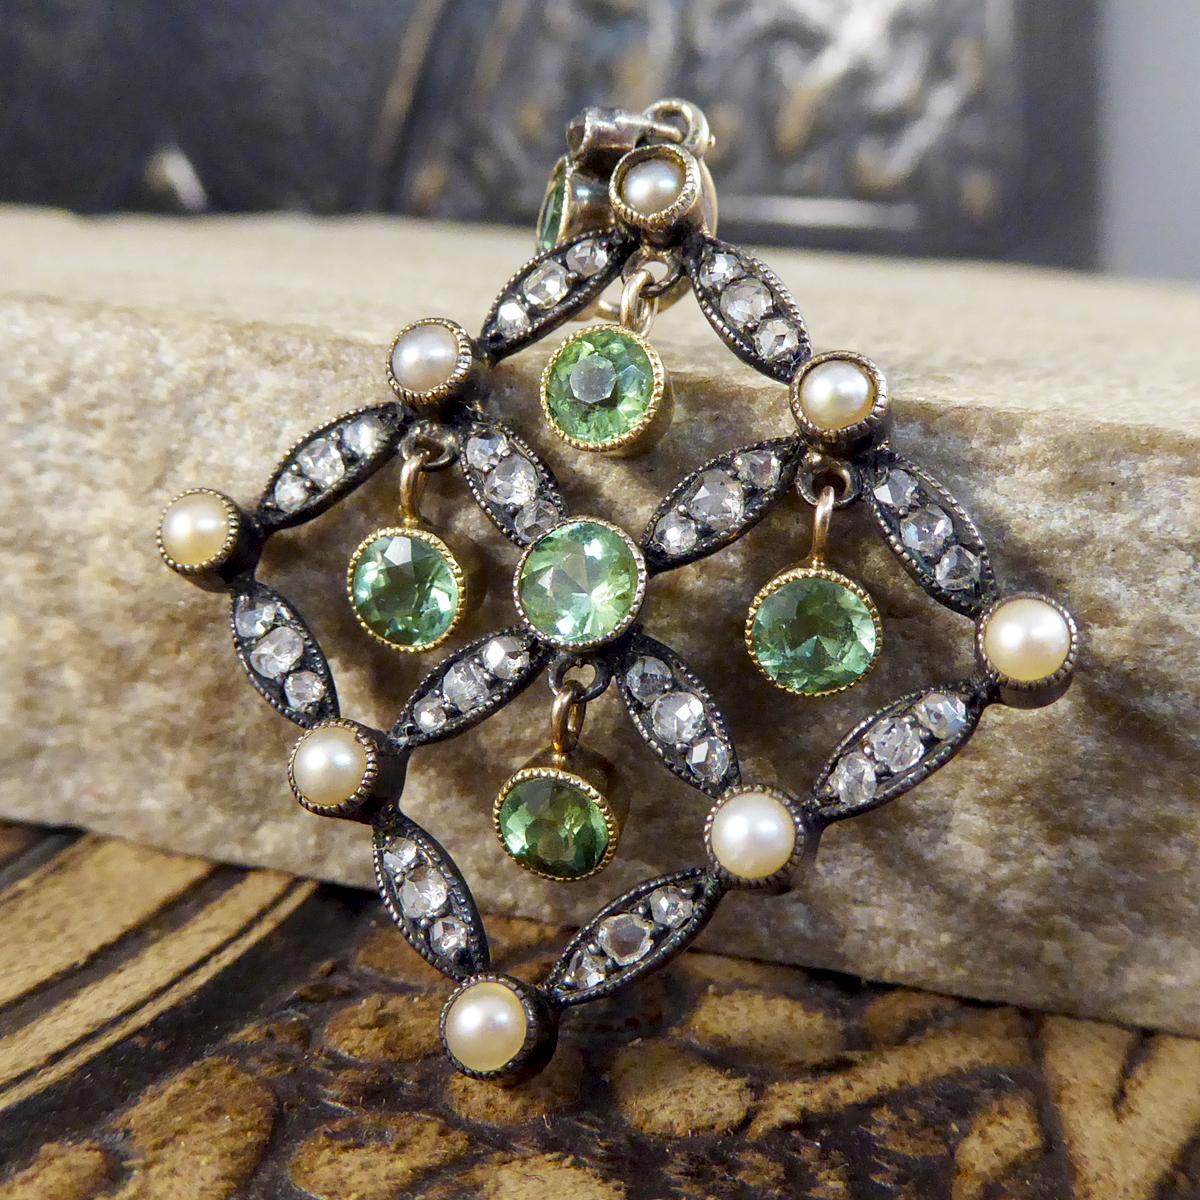 A lovely hand crafted pendant, with a Yellow Gold back and Platinum setting bordering on Late Victorian and Early Edwardian. This gorgeous quality pendant holds six beautifully green Peridot stones in a millegrain rub over collar setting, four of